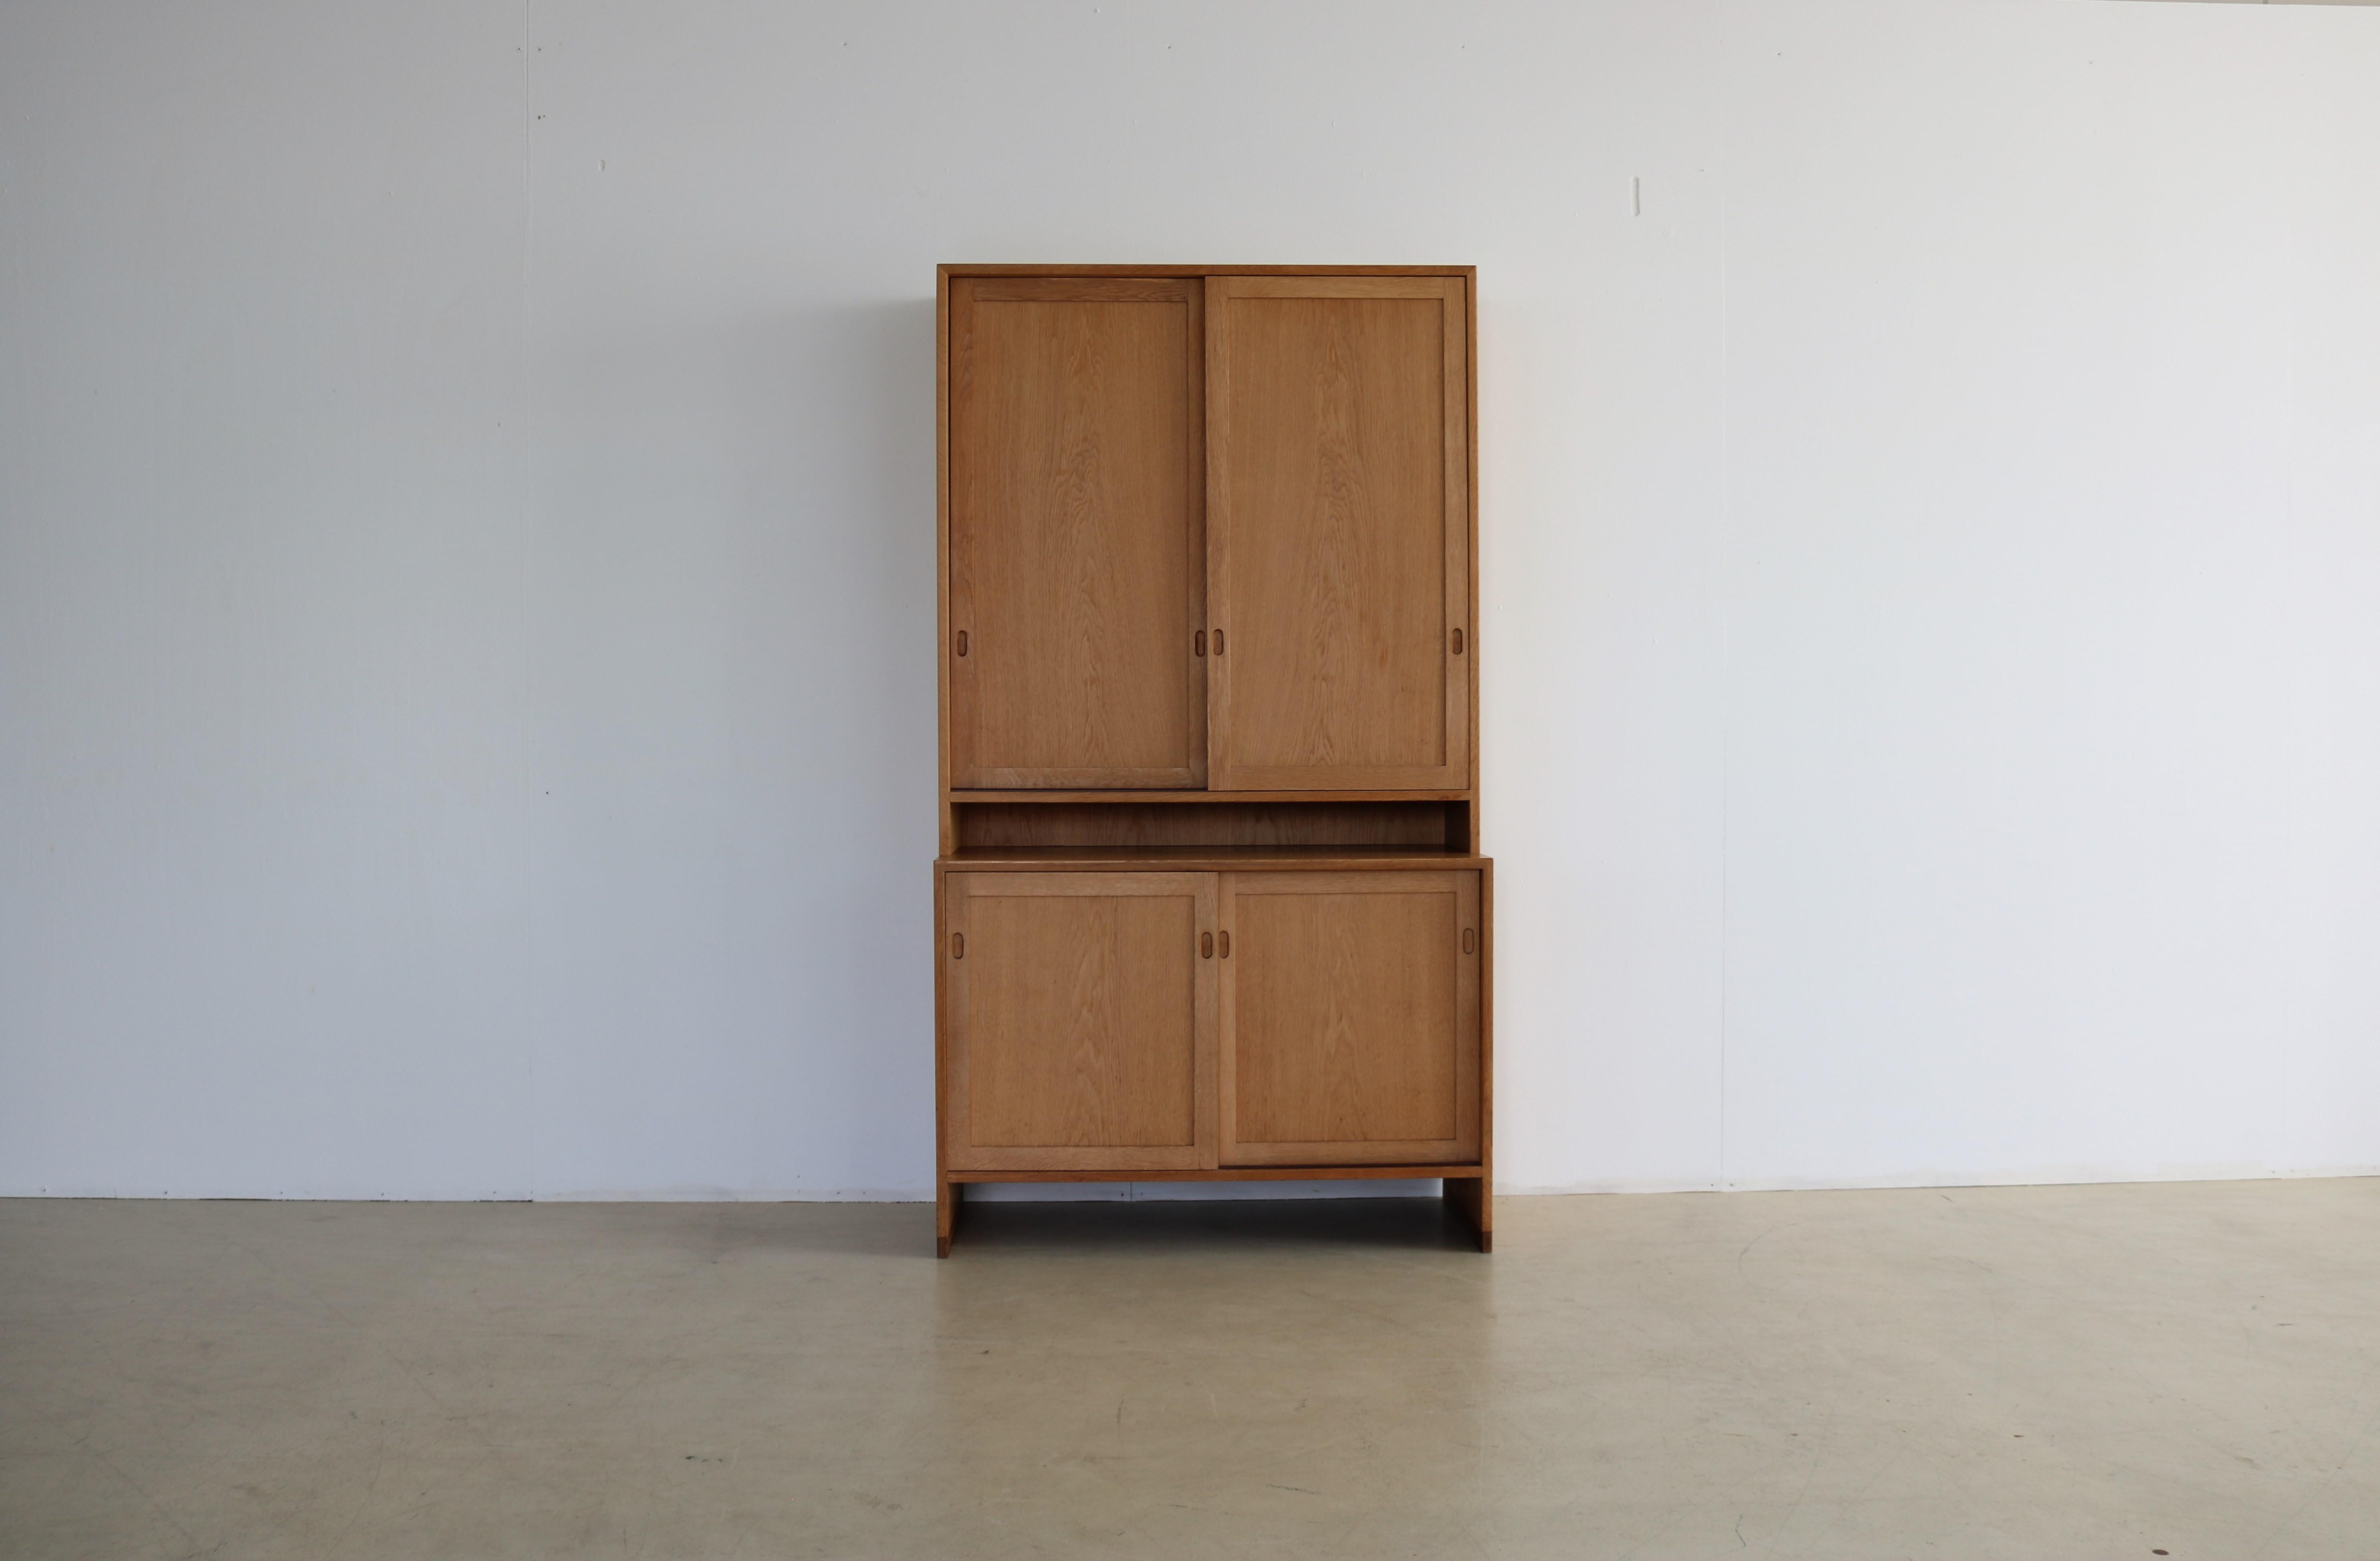 vintage wall cabinet cabinet Hans Wegner R.Y. Mobler

period 60's
designs Hans Wegner R.Y. Mobler Denmark
conditions good light signs of use
size 181 x 100 x 48.5 (HxWxD)

details Oak; teak;

article number 1735.